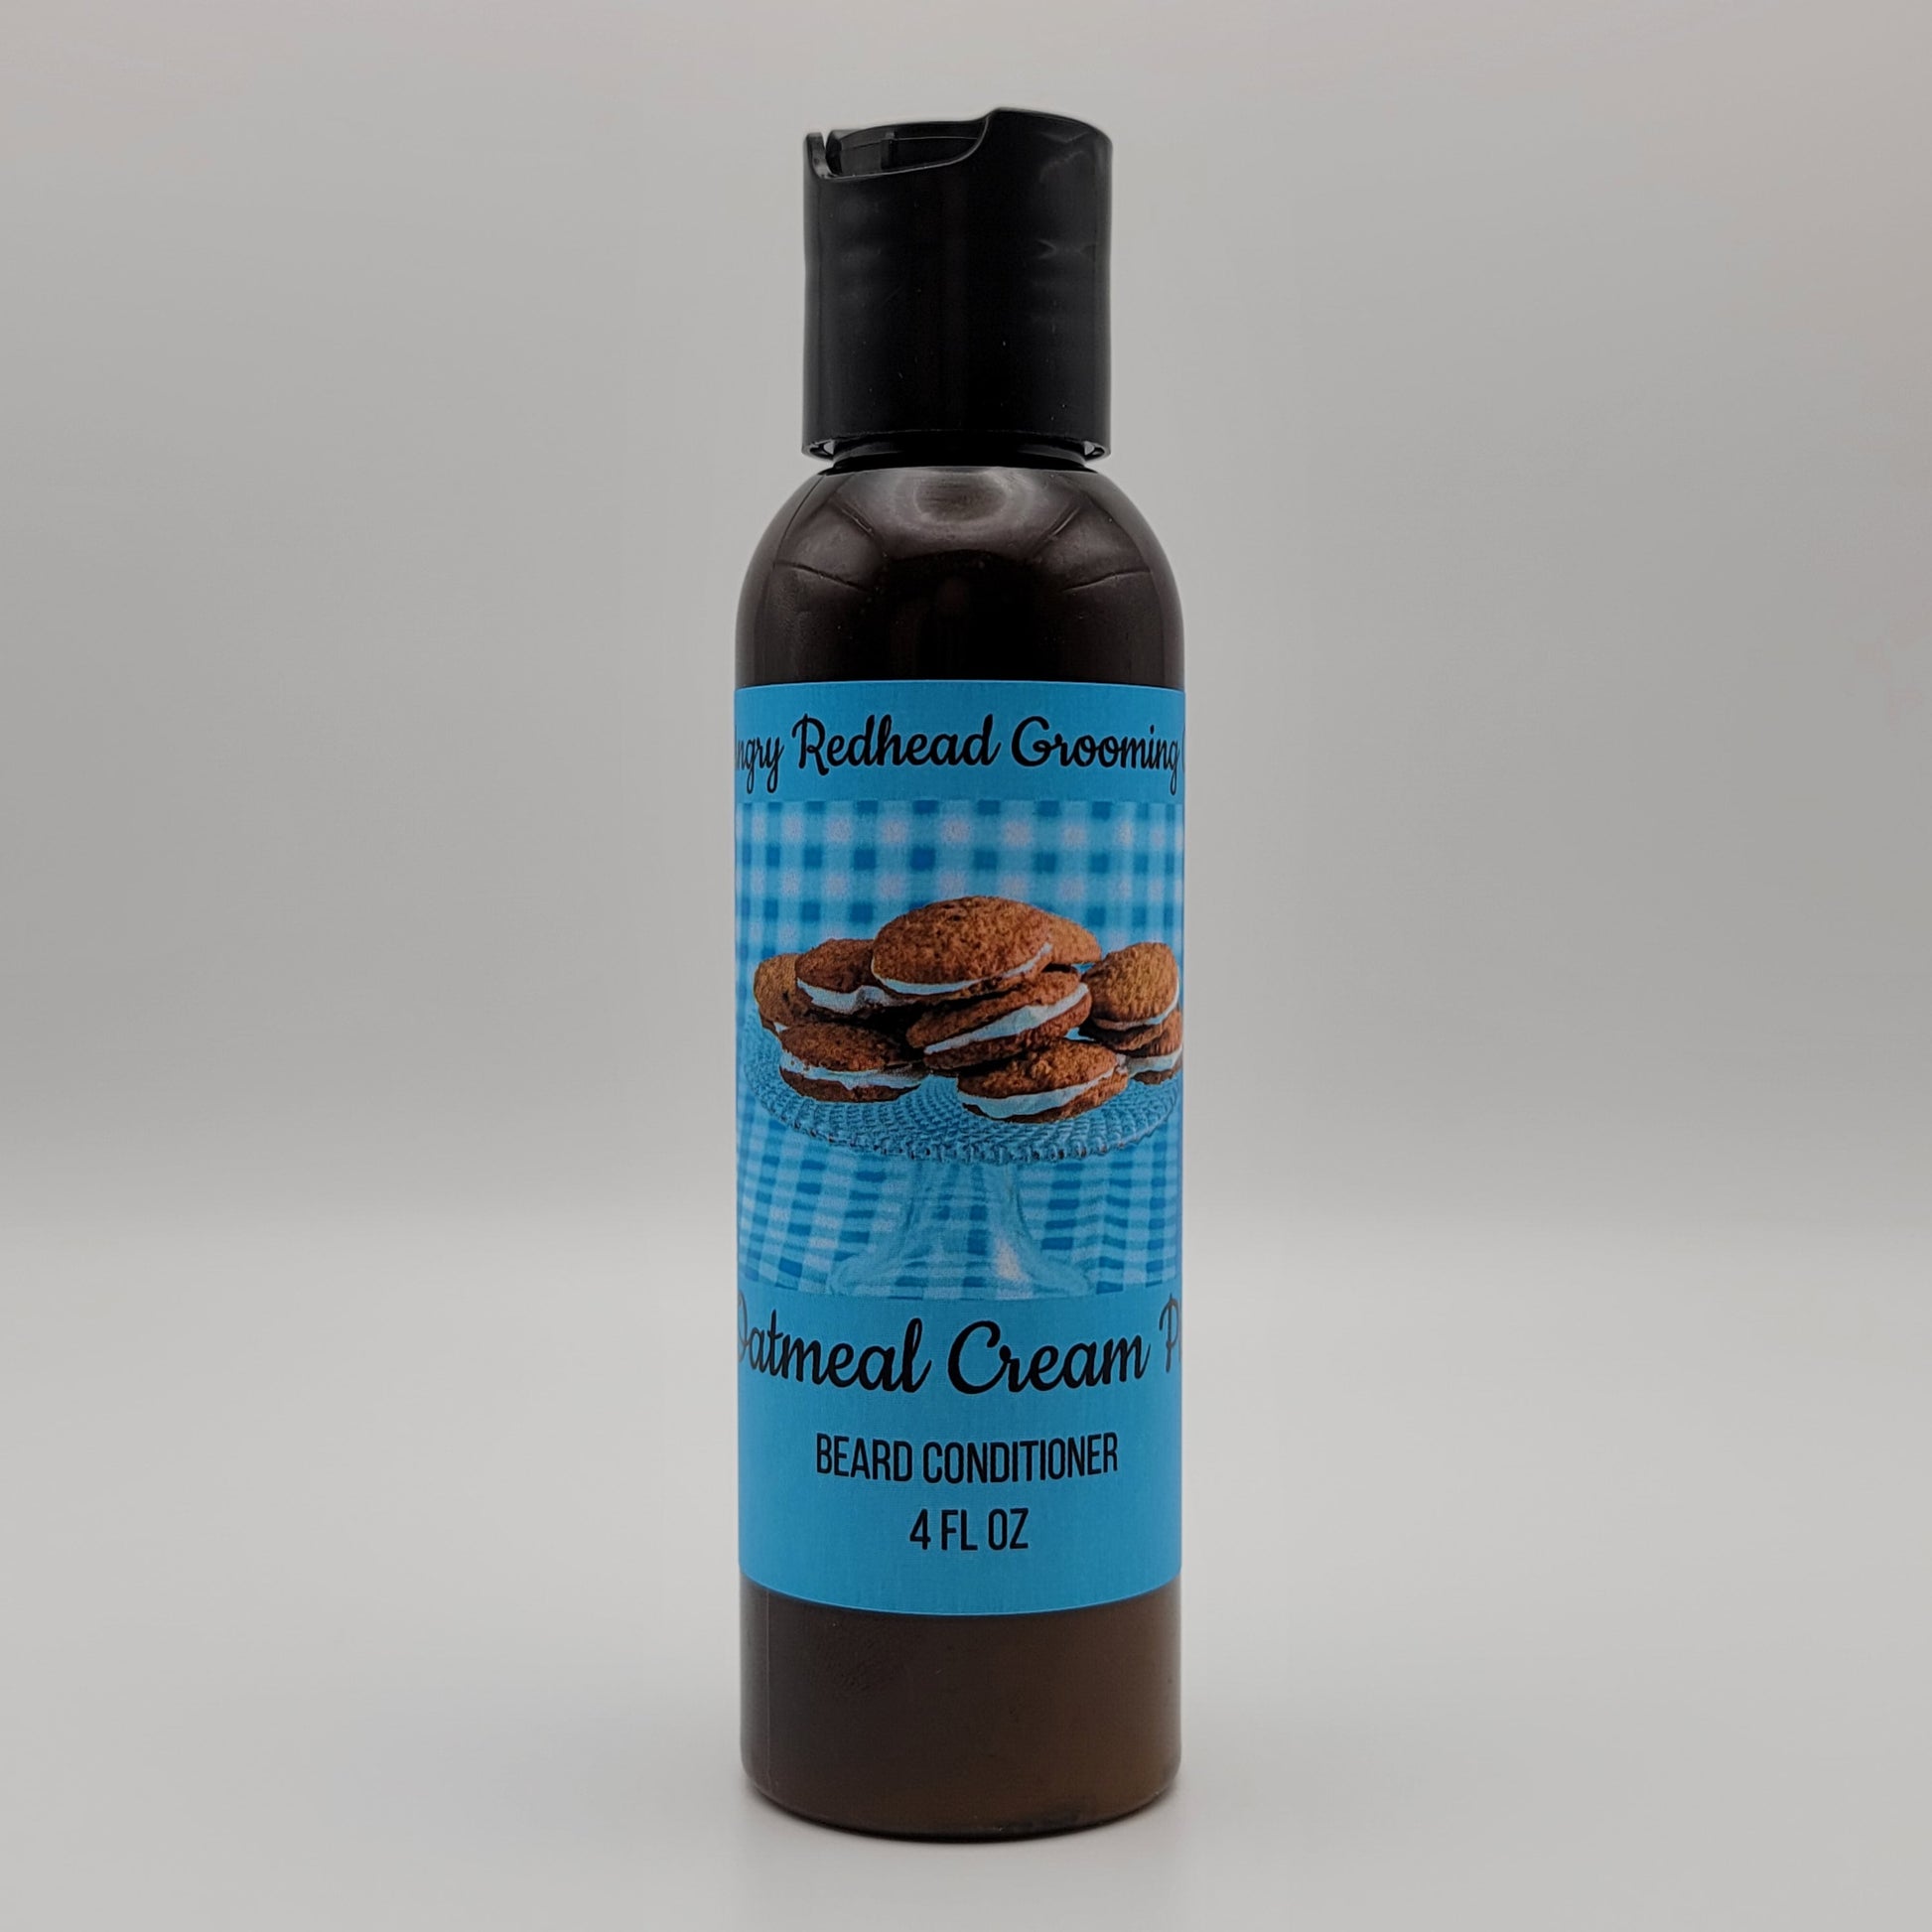 Oatmeal Cream Pie Beard Conditioner by Angry Redhead Grooming Co - angryredheadgrooming.com